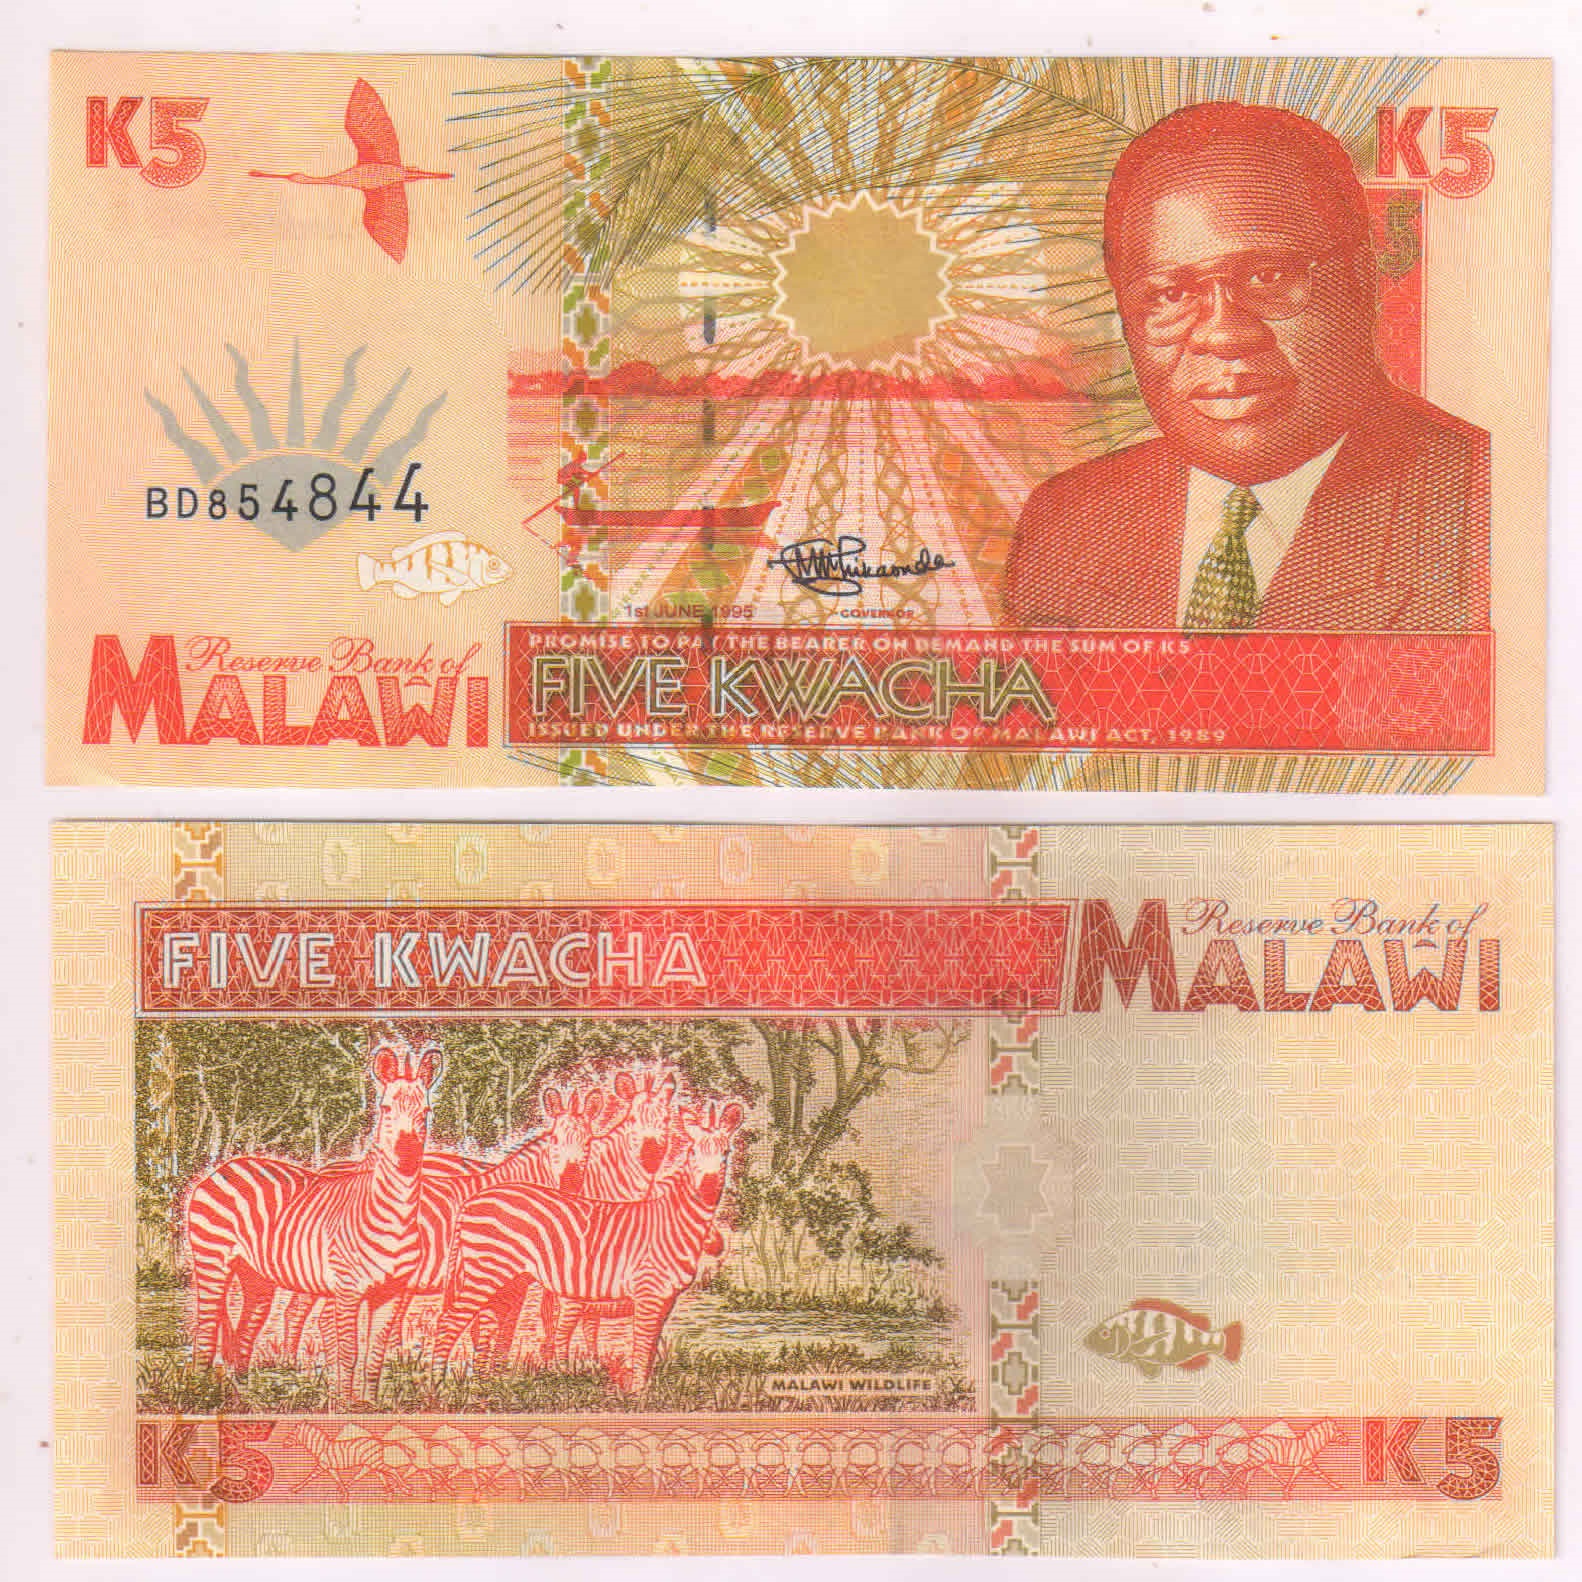 malawi-5-kwacha-1998-unc-currency-note-kb-coins-currencies